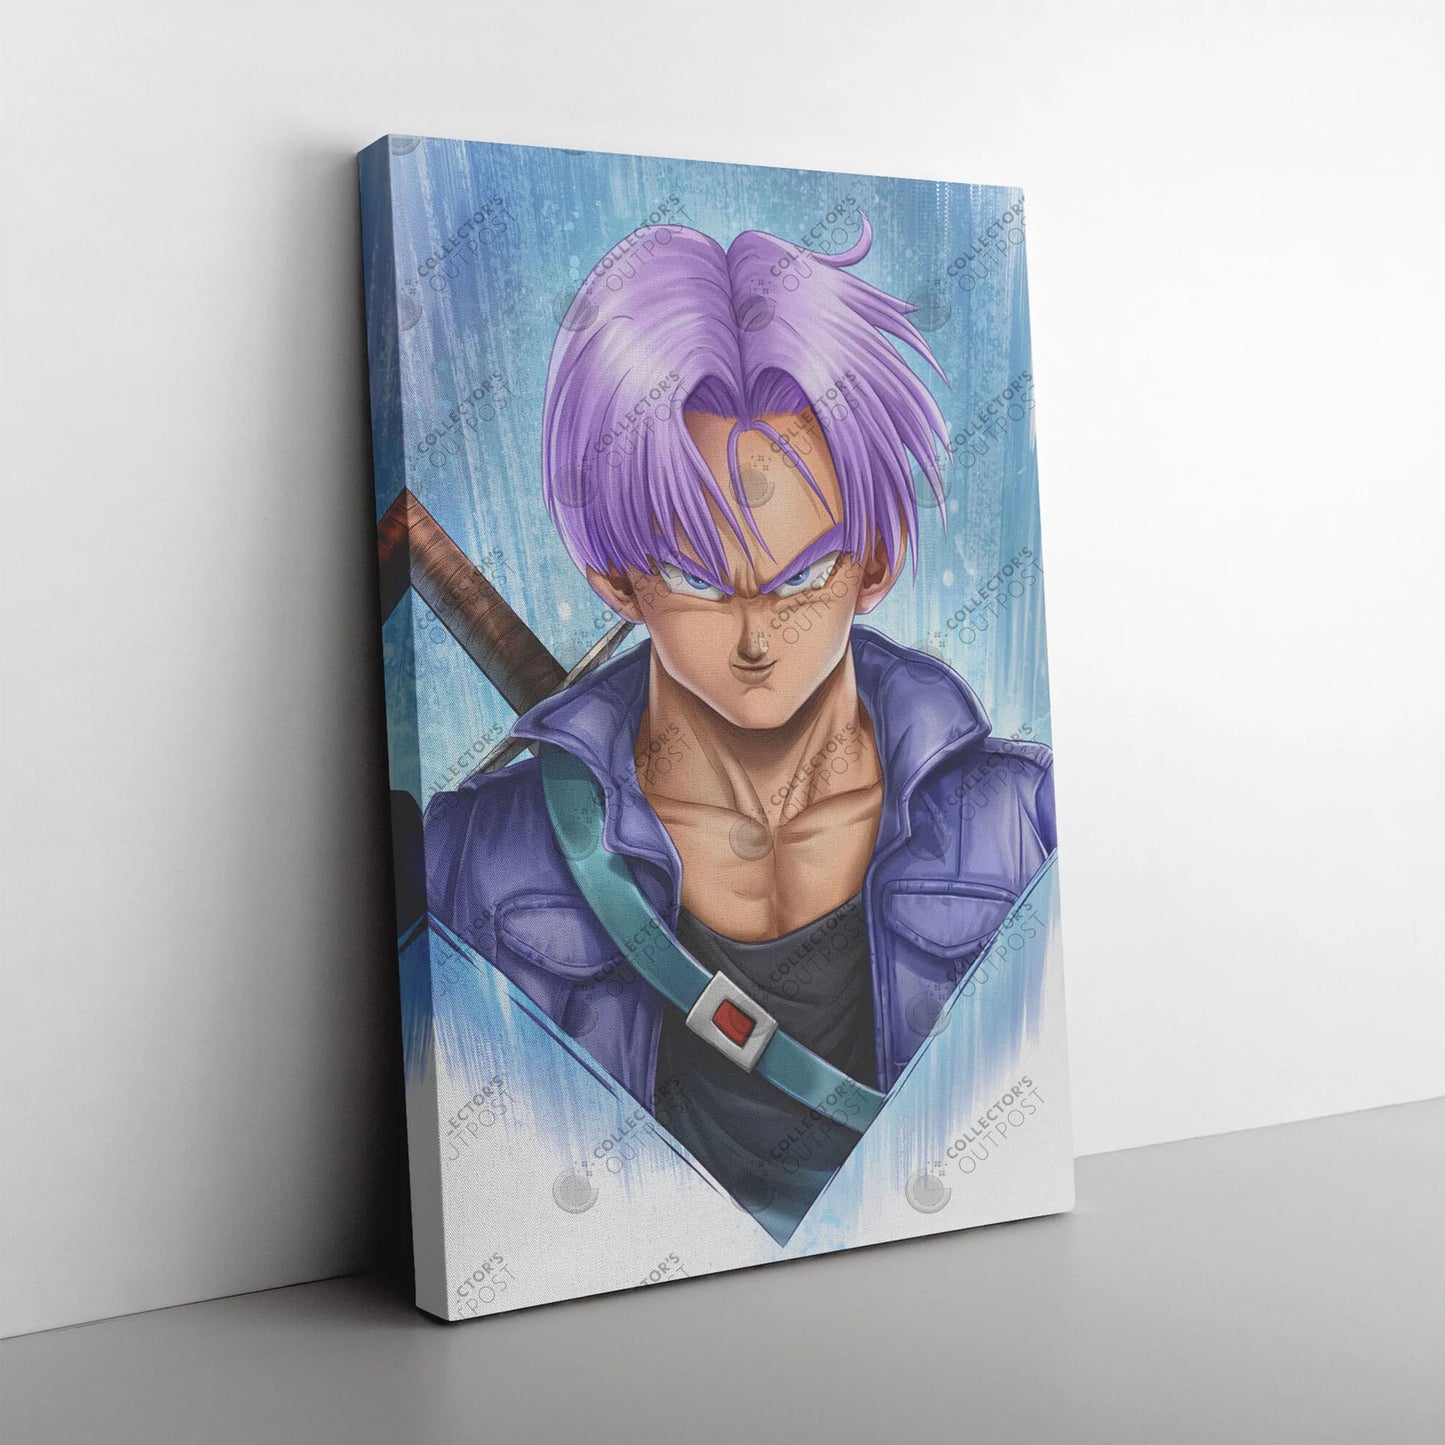 Future Trunks Dragon Ball Fine Art Anime Poster for Sale by